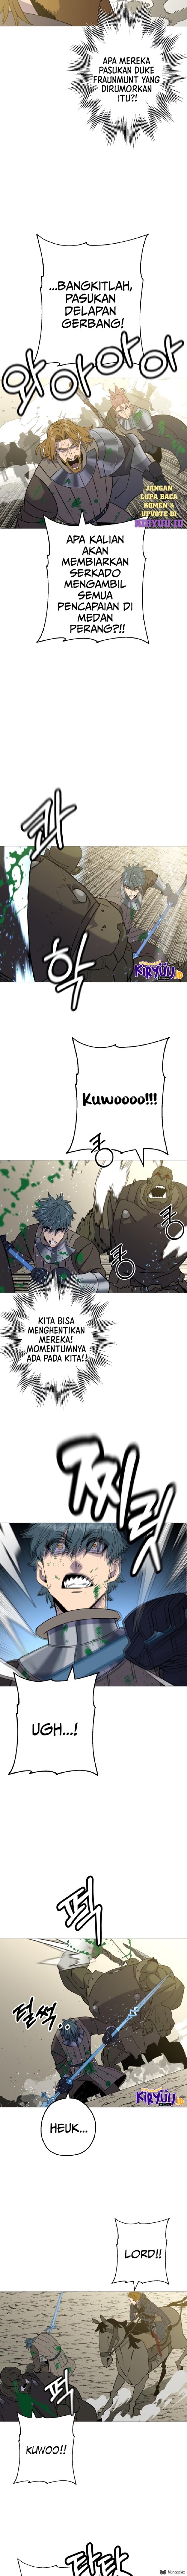 Dilarang COPAS - situs resmi www.mangacanblog.com - Komik the story of a low rank soldier becoming a monarch 107 - chapter 107 108 Indonesia the story of a low rank soldier becoming a monarch 107 - chapter 107 Terbaru 2|Baca Manga Komik Indonesia|Mangacan